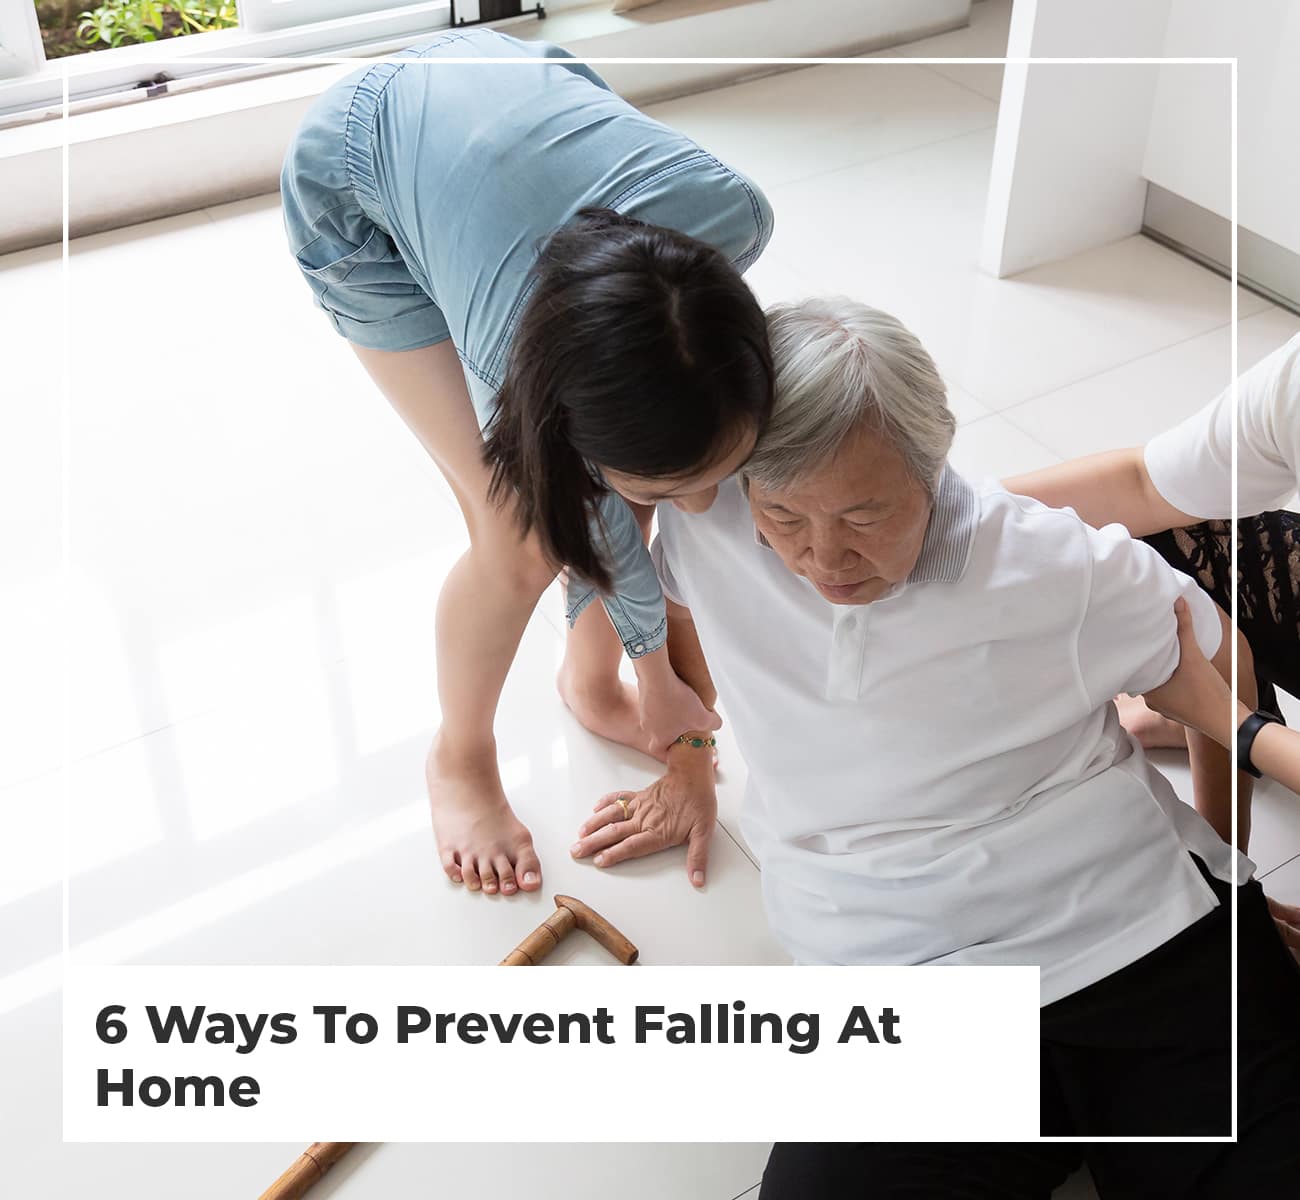 6 Ways To Prevent Falling At Home - Main Image